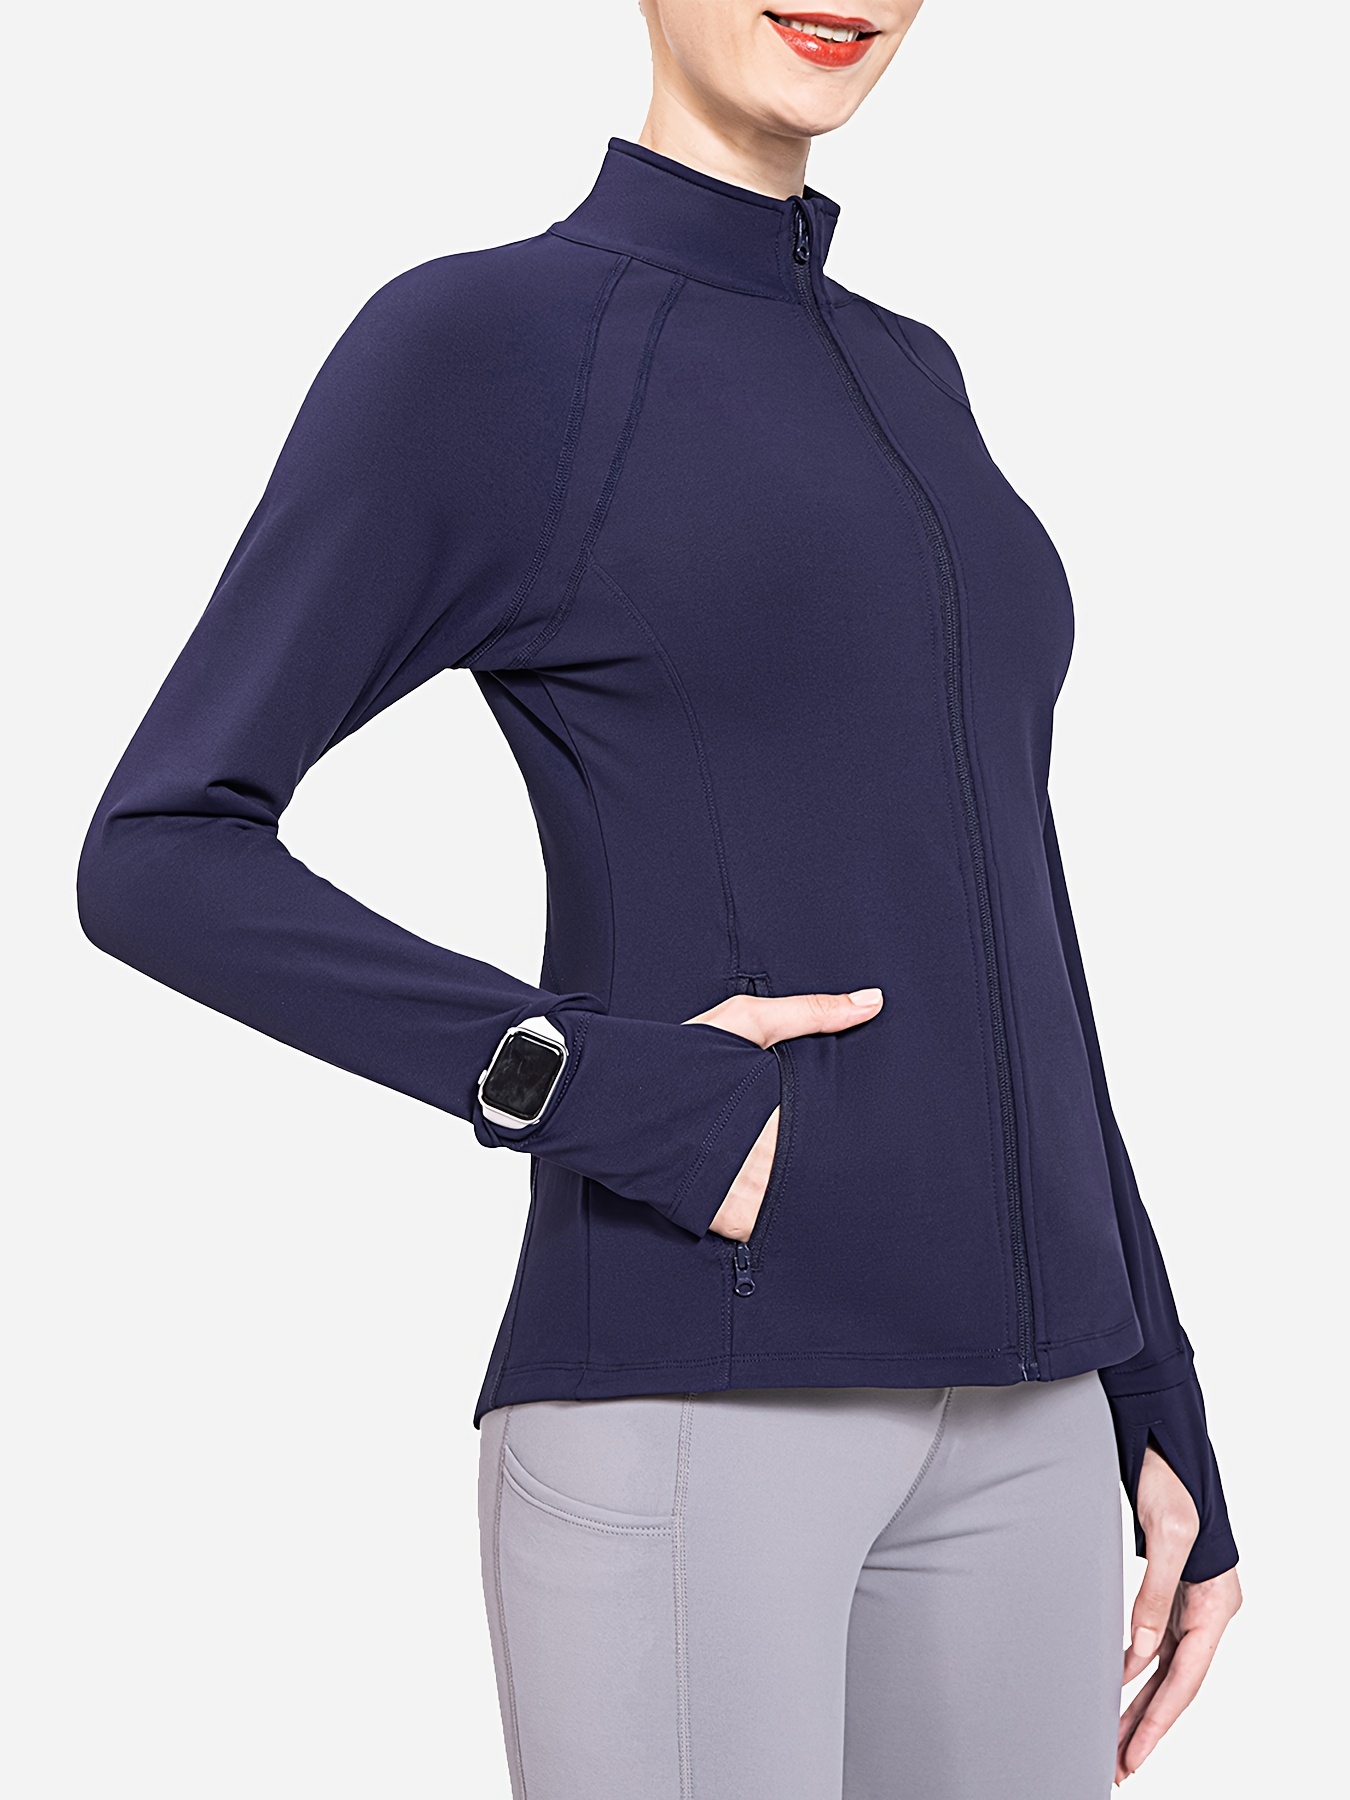 Womens Solid Color Full Zip Front Cycling Jacket Long Sleeve Thumb